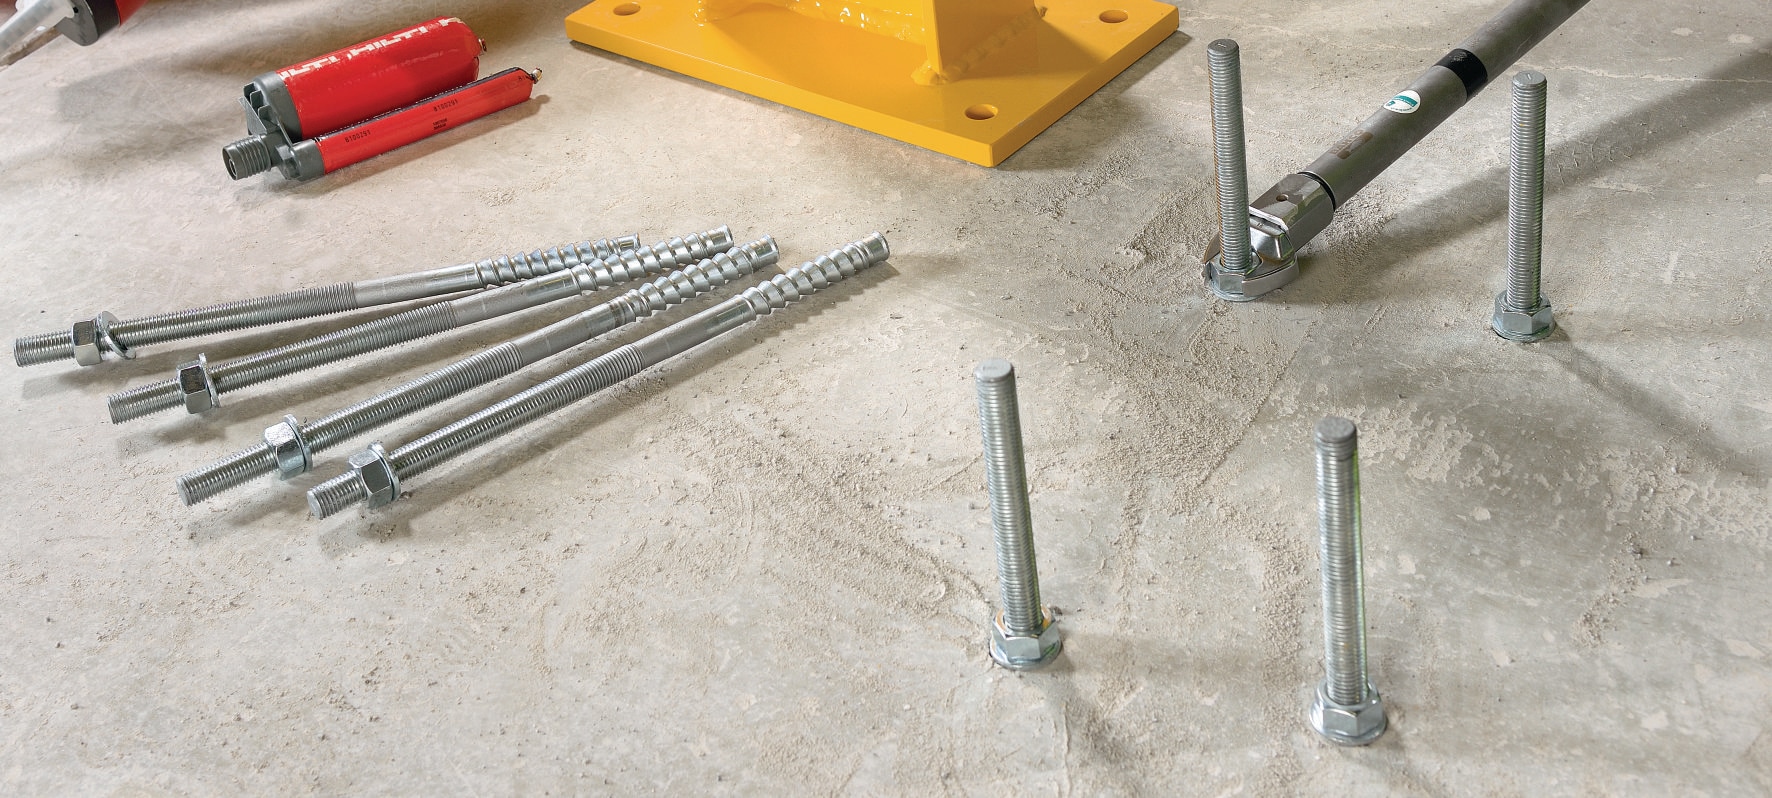 HIT-Z Anchor rod - Anchor rods and elements - Hilti Ireland